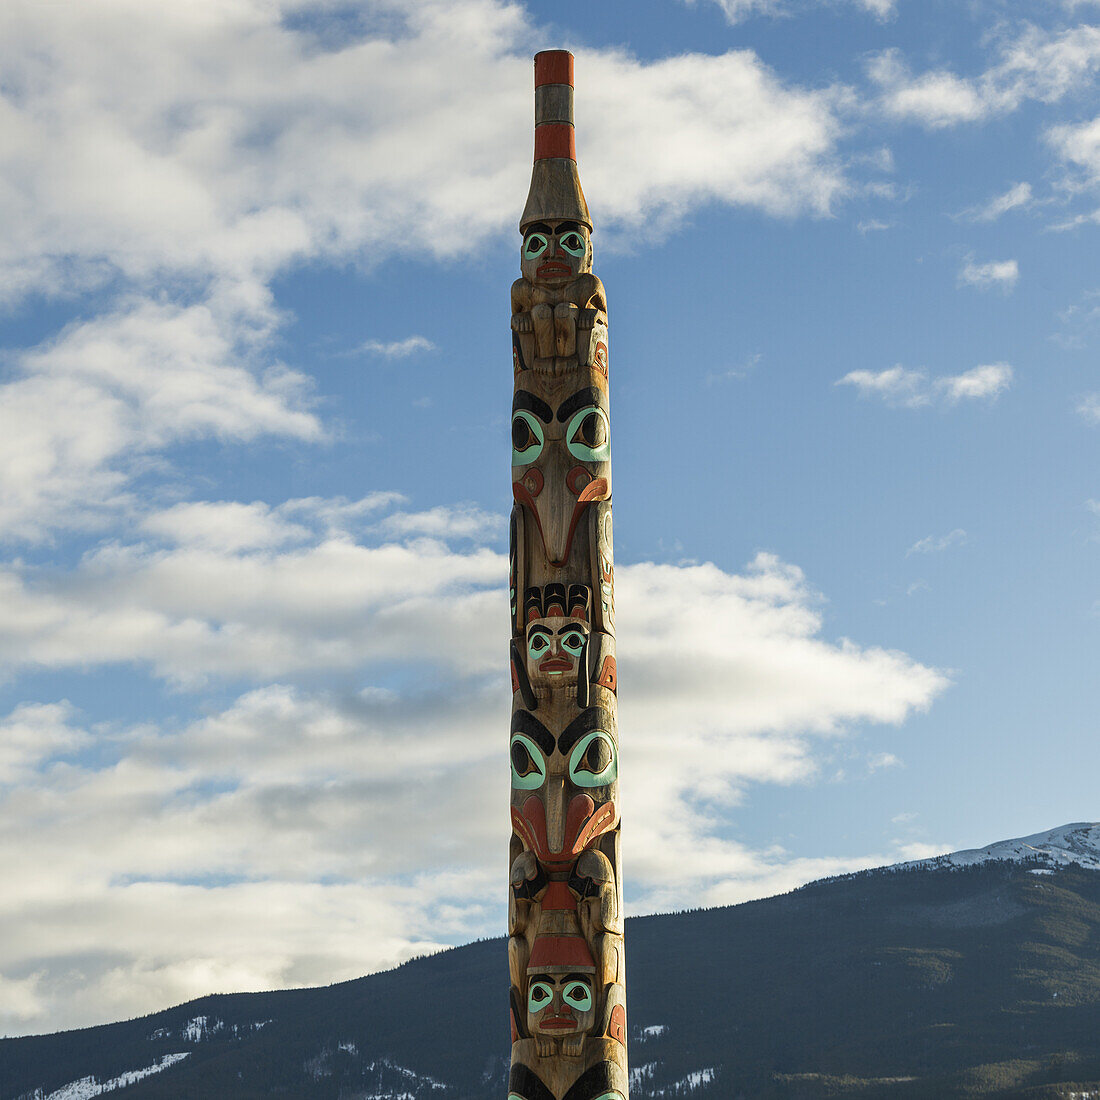 Totem Pole Against A Blue Sky With Cloud And A Mountain In The Background, Jasper National Park; Alberta, Canada